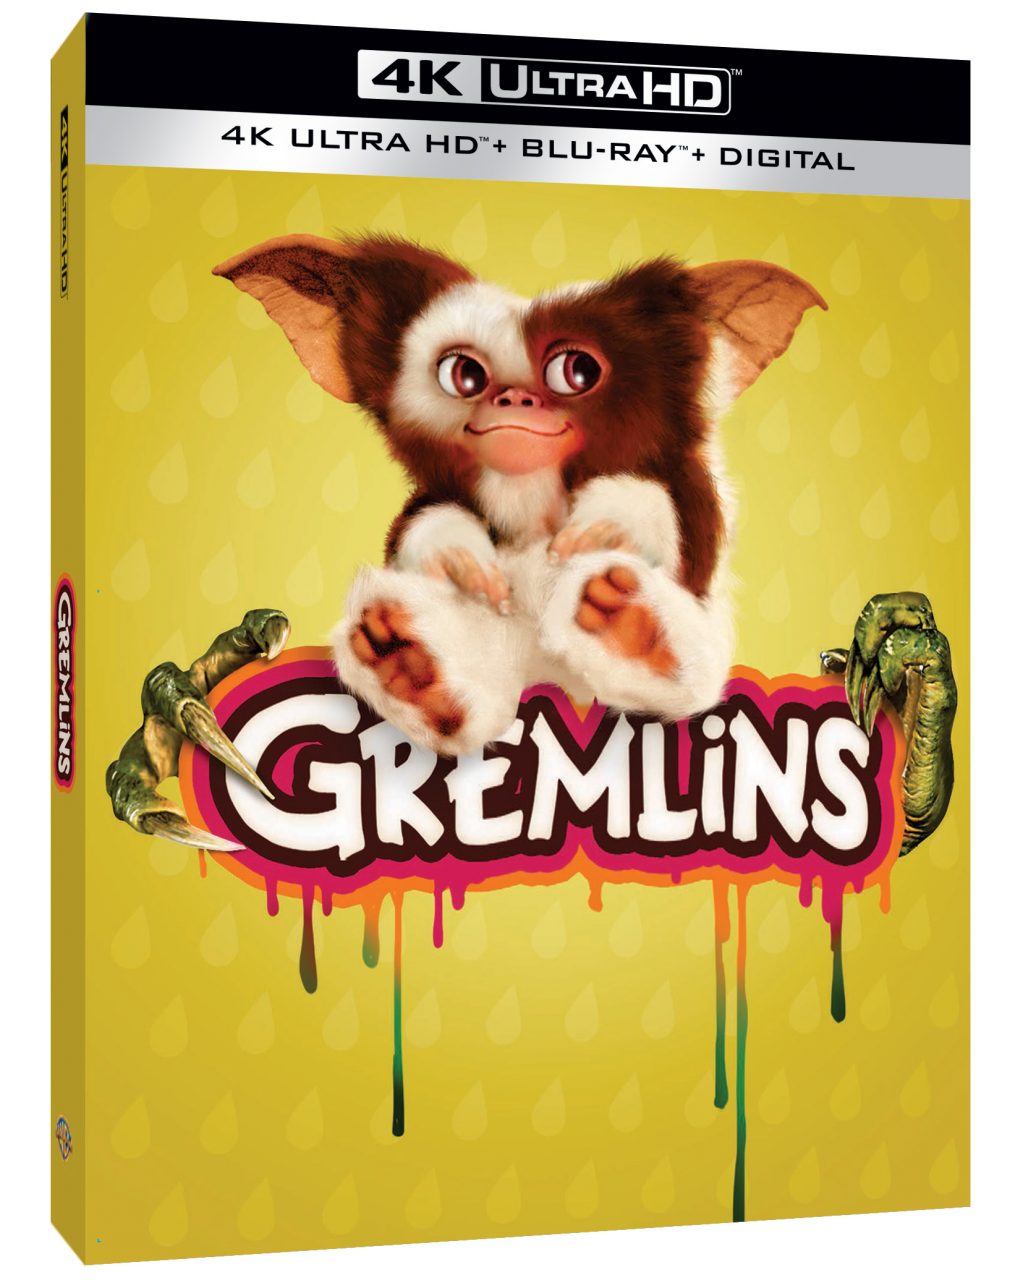 Gremlins 35th Anniversary 4K Ultra HD Combo Pack cover (Warner Bros. Home Entertainment)